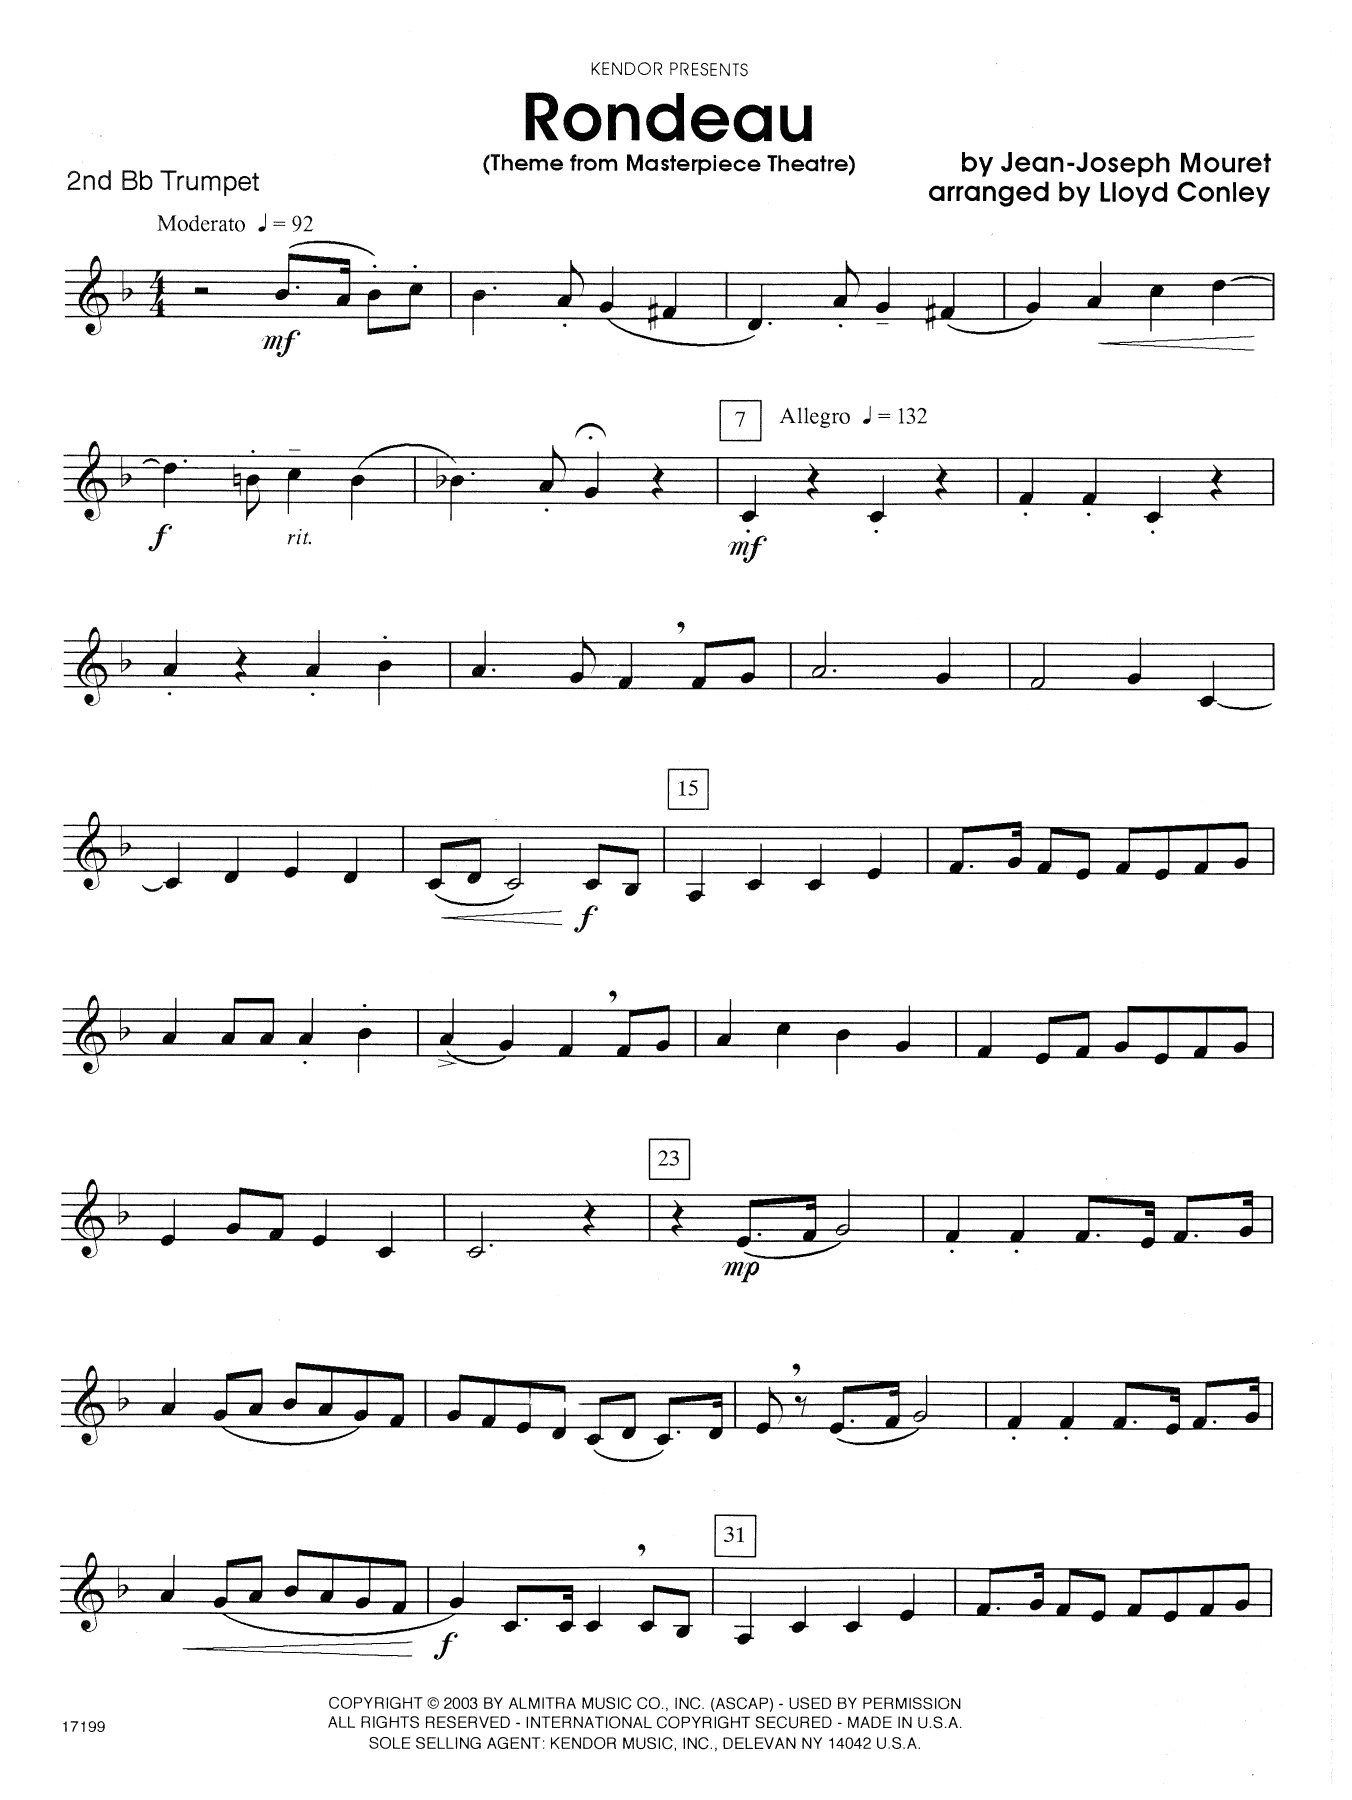 Lloyd Conley Rondeau (Theme From Masterpiece Theatre) - 2nd Bb Trumpet sheet music notes and chords. Download Printable PDF.